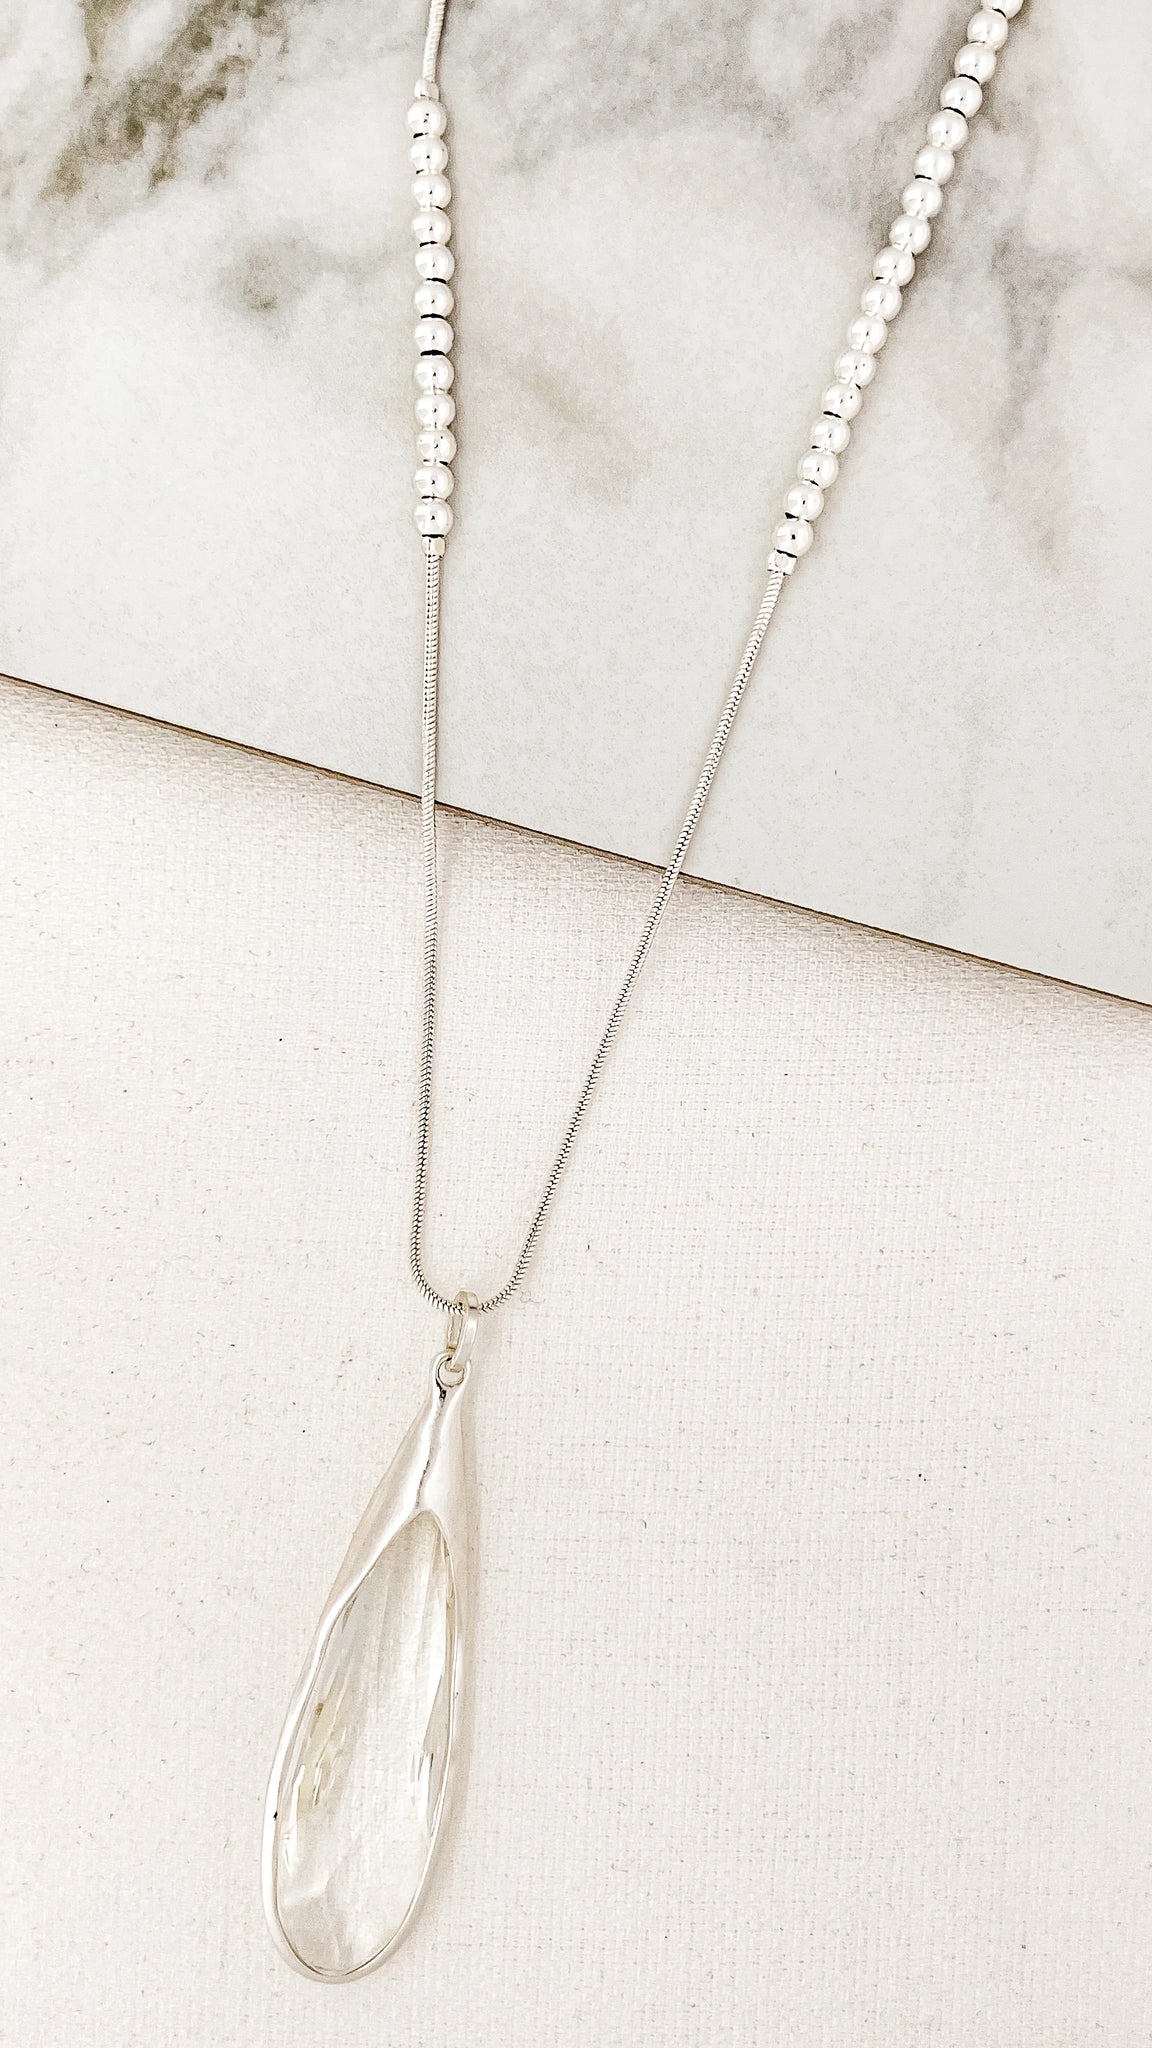 Long silver necklace with smokey grey drop glass pendant